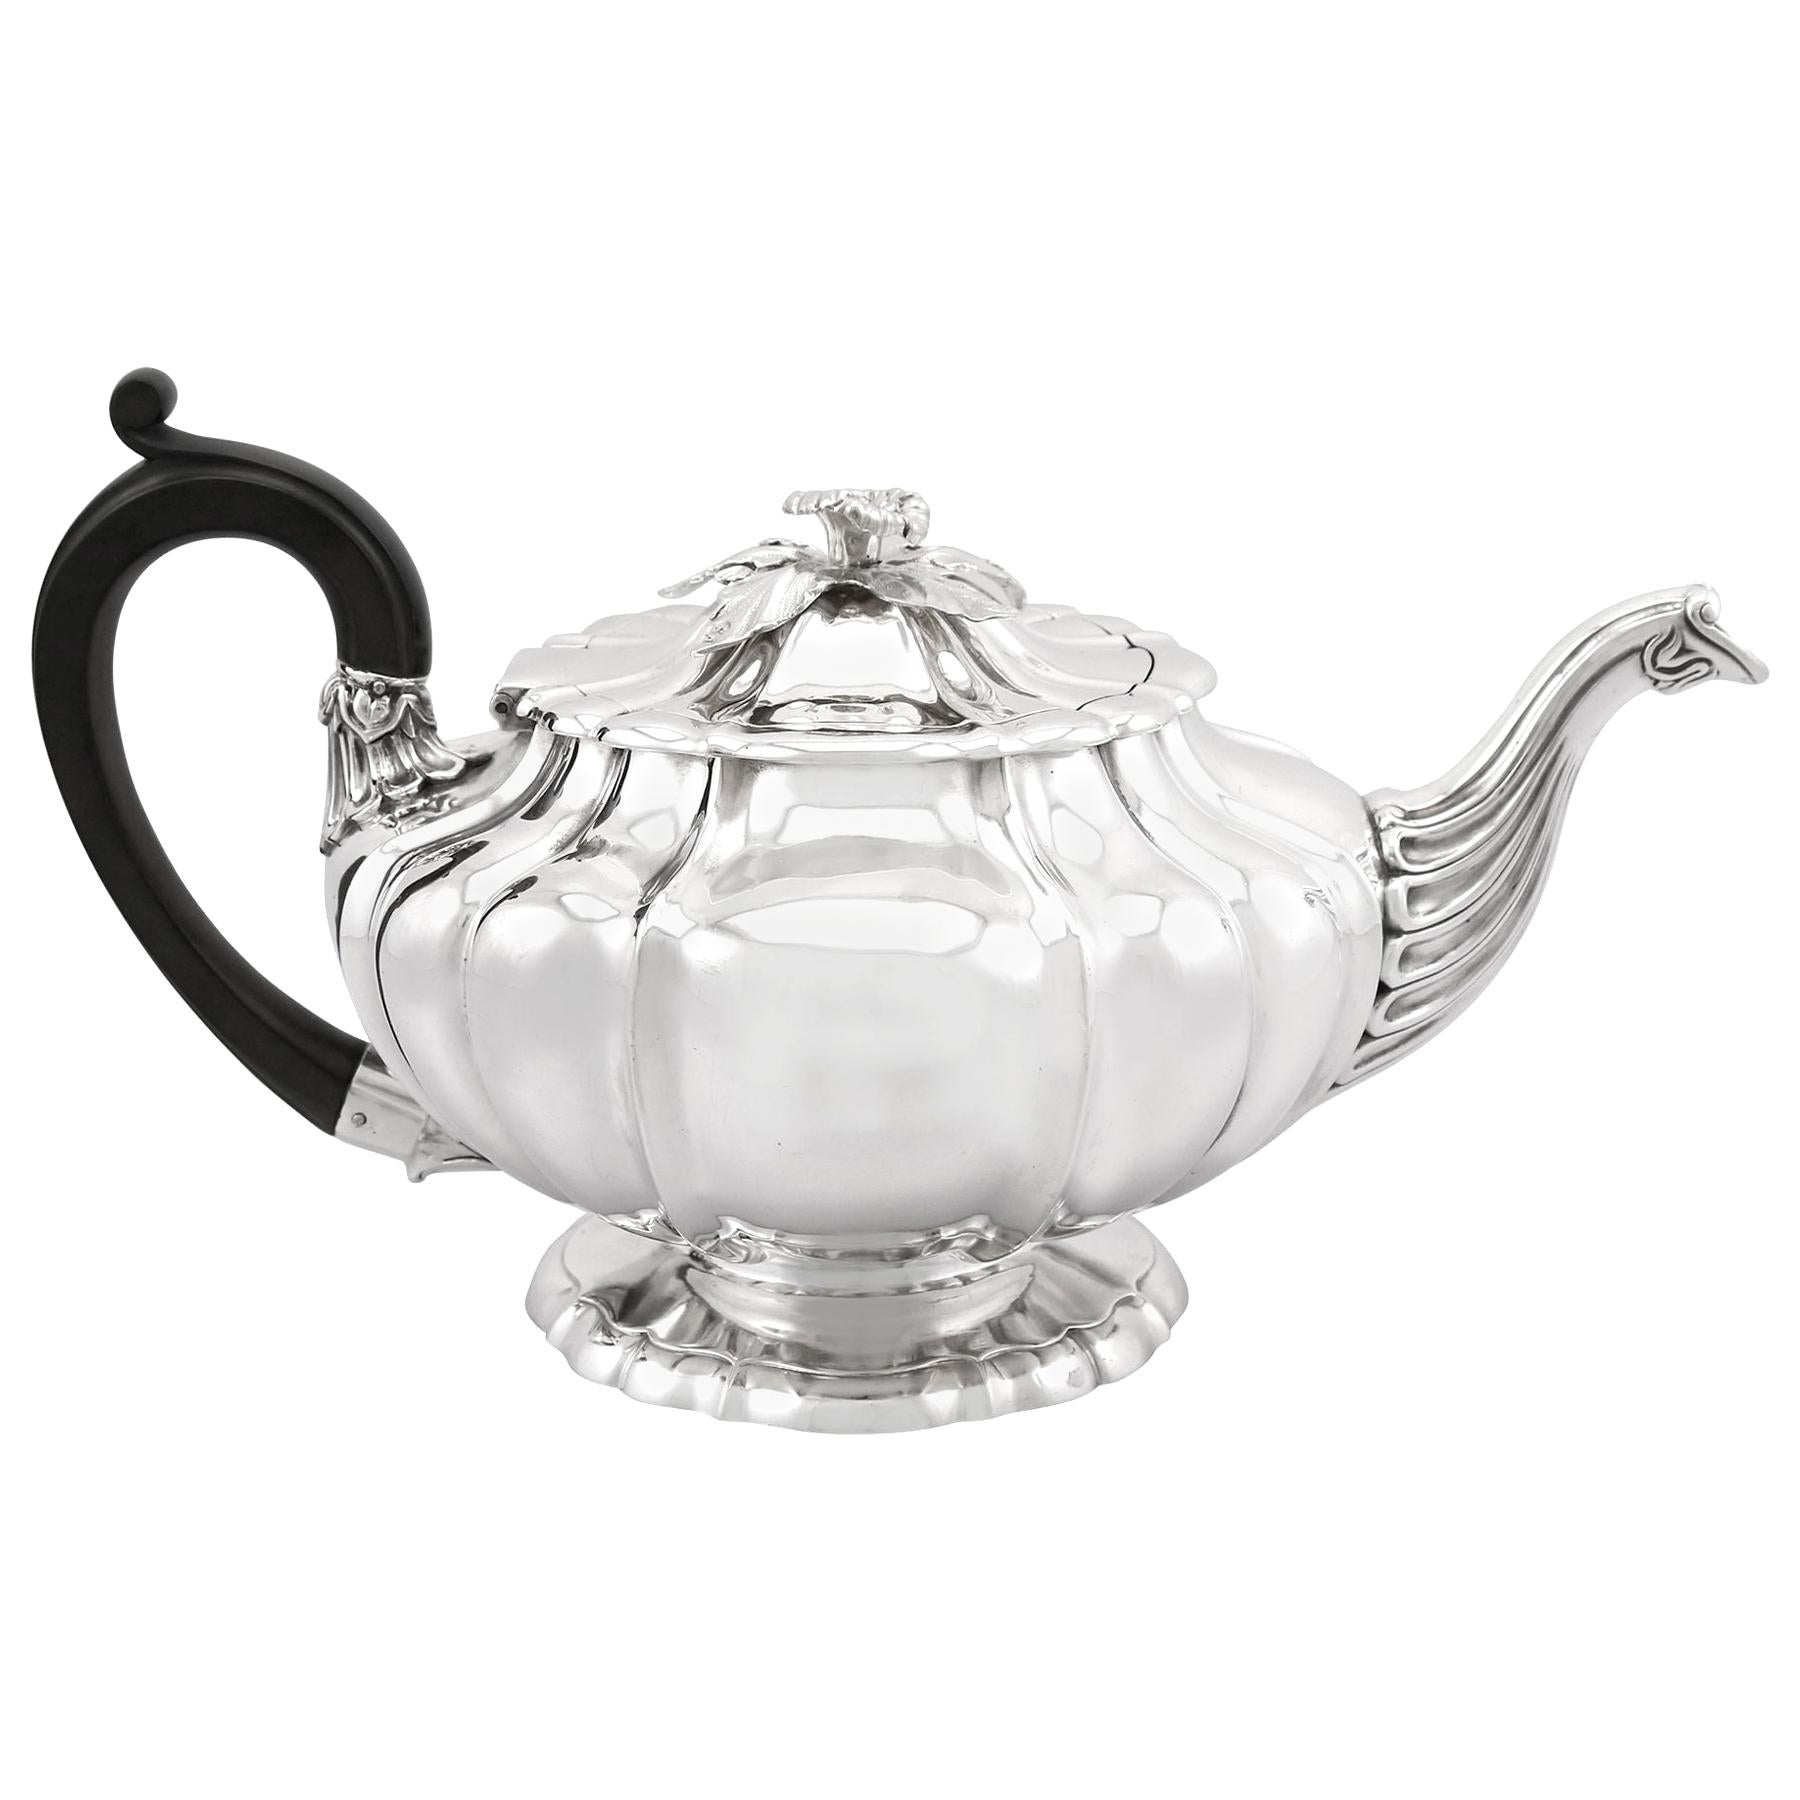 Antique George IV Sterling Silver Teapot by Paul Storr, 1827